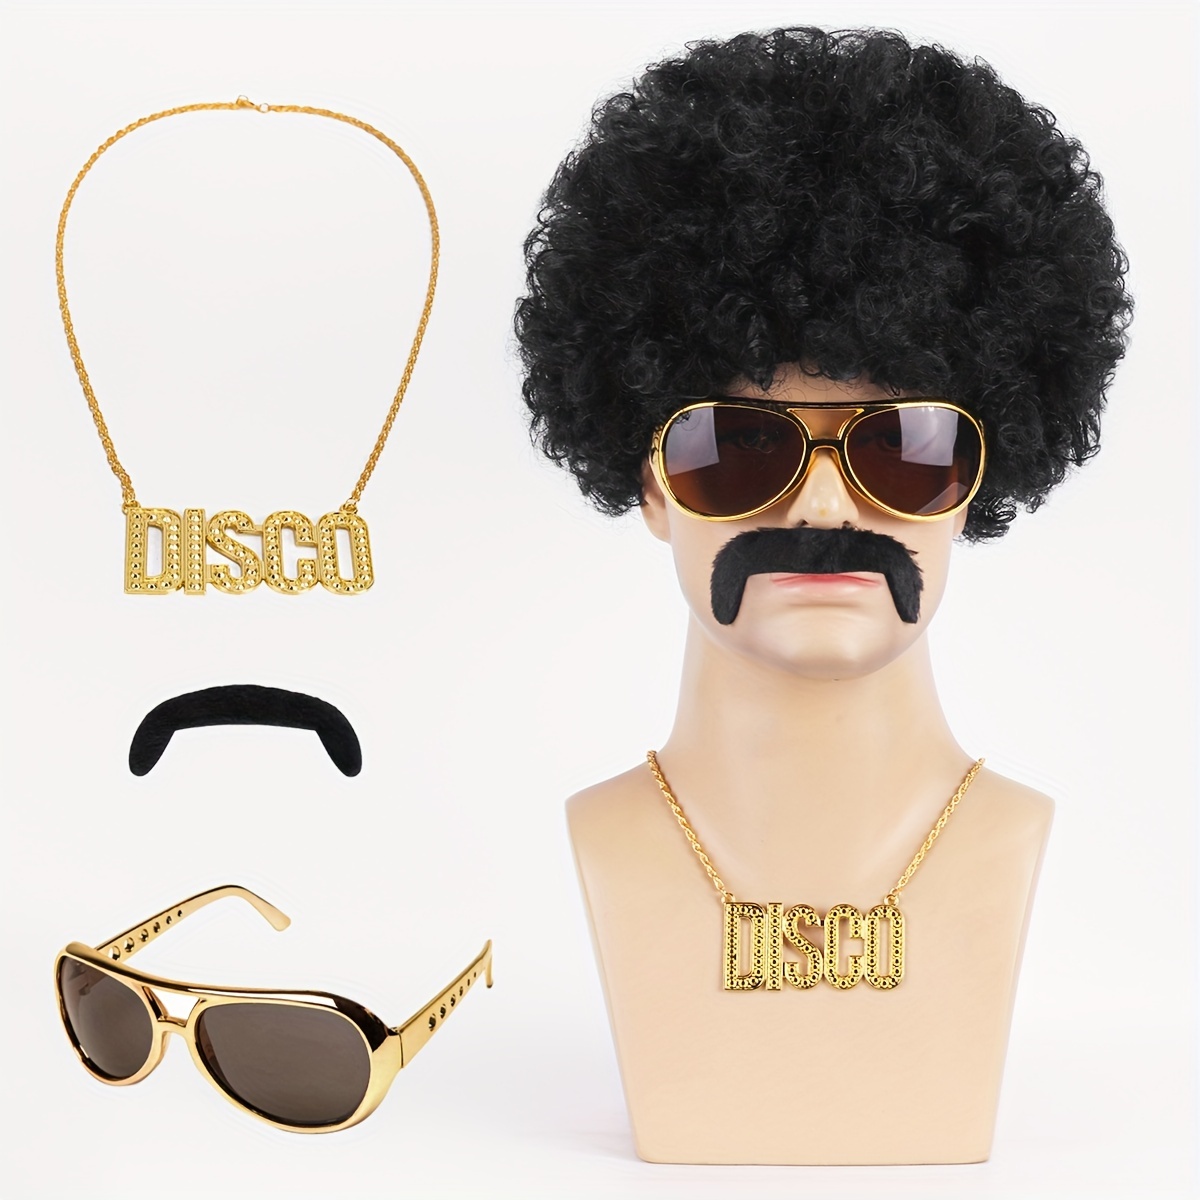 

Afro Wig Men, 4pcs Set { Wig+ Glasses+ Necklace+ Mustache } 70's 80s Costumes Wig Disco Wig For Men Fluffy Short Black Curly Synthetic Hair Wig For Christmas Cosplay Party